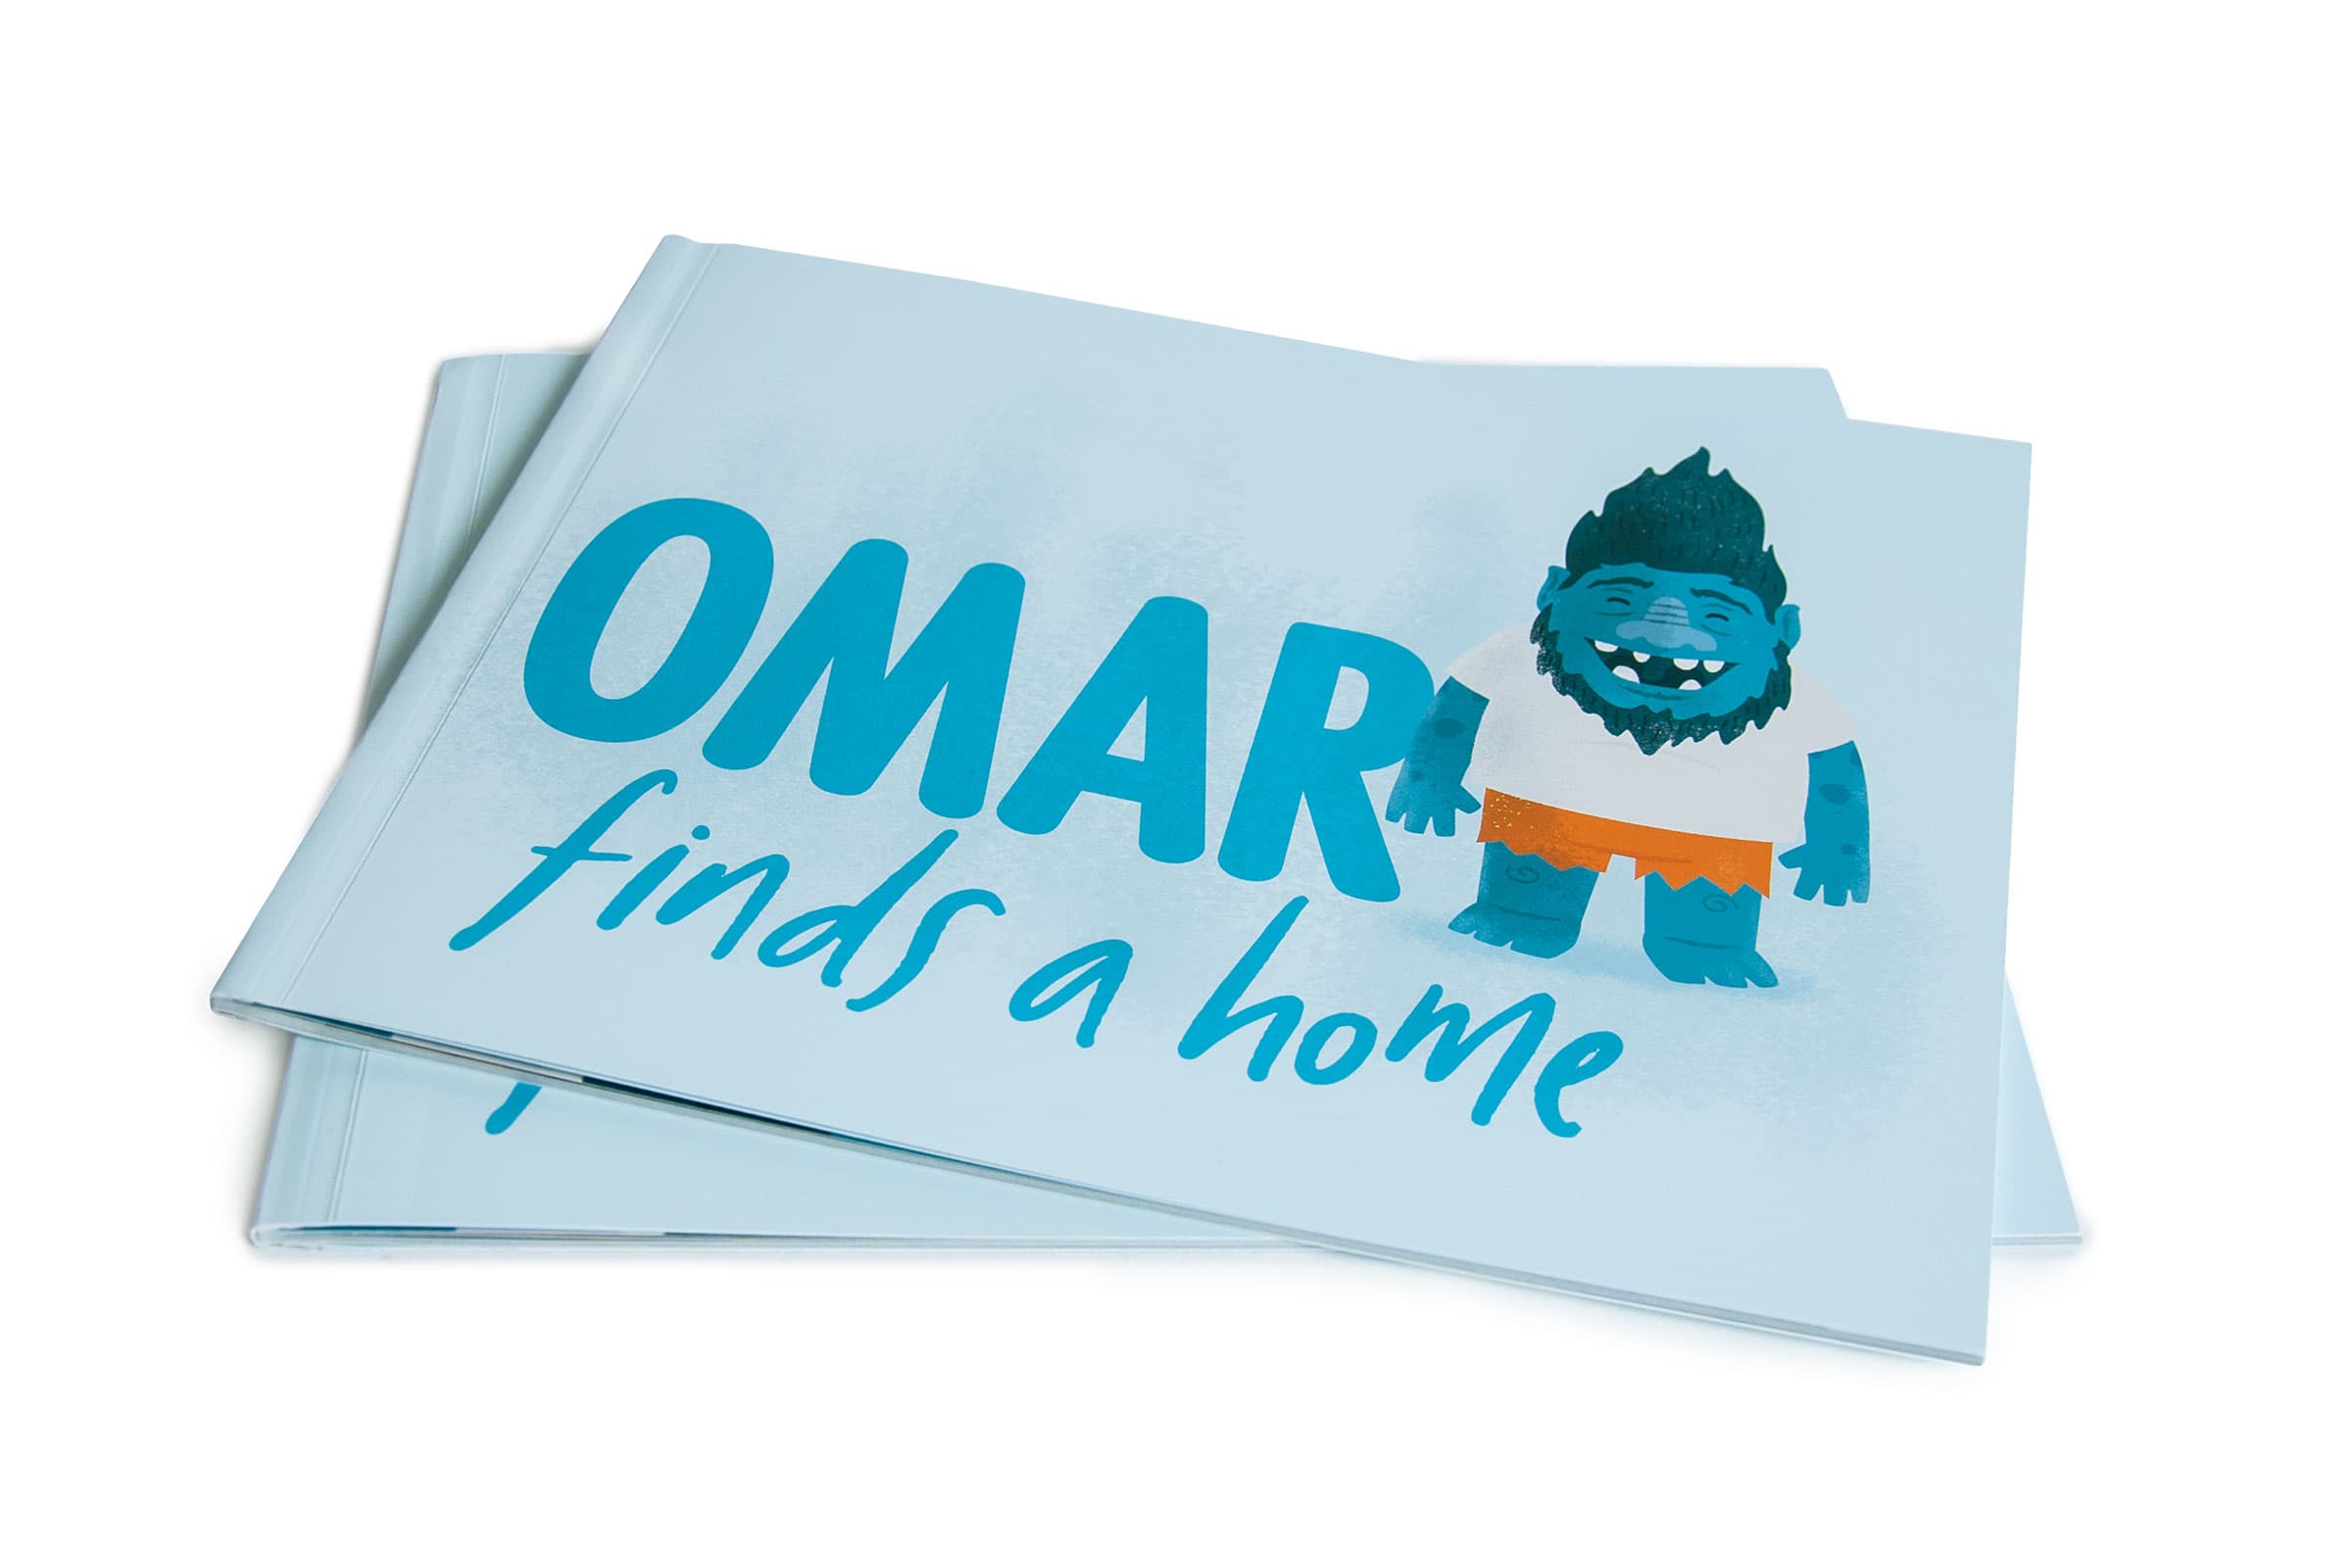 Omar the Troll storybook cover